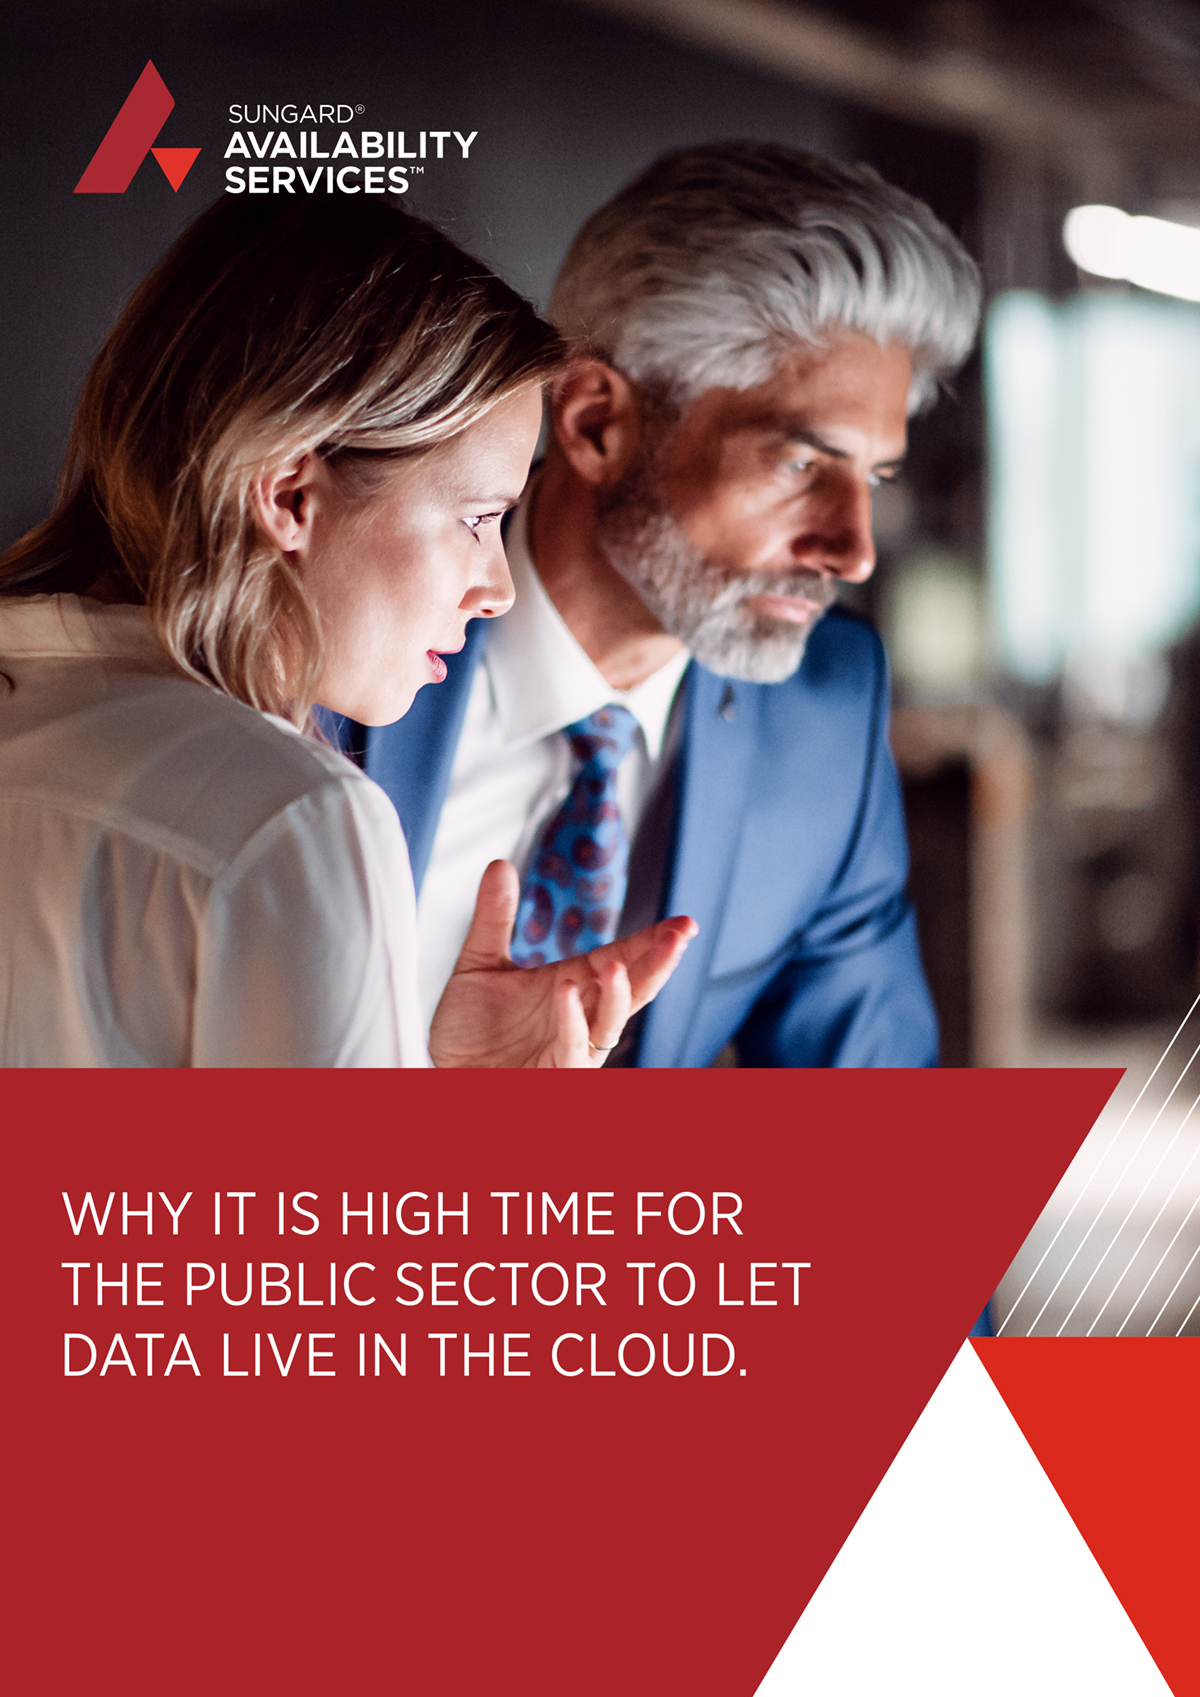 data live in the cloud